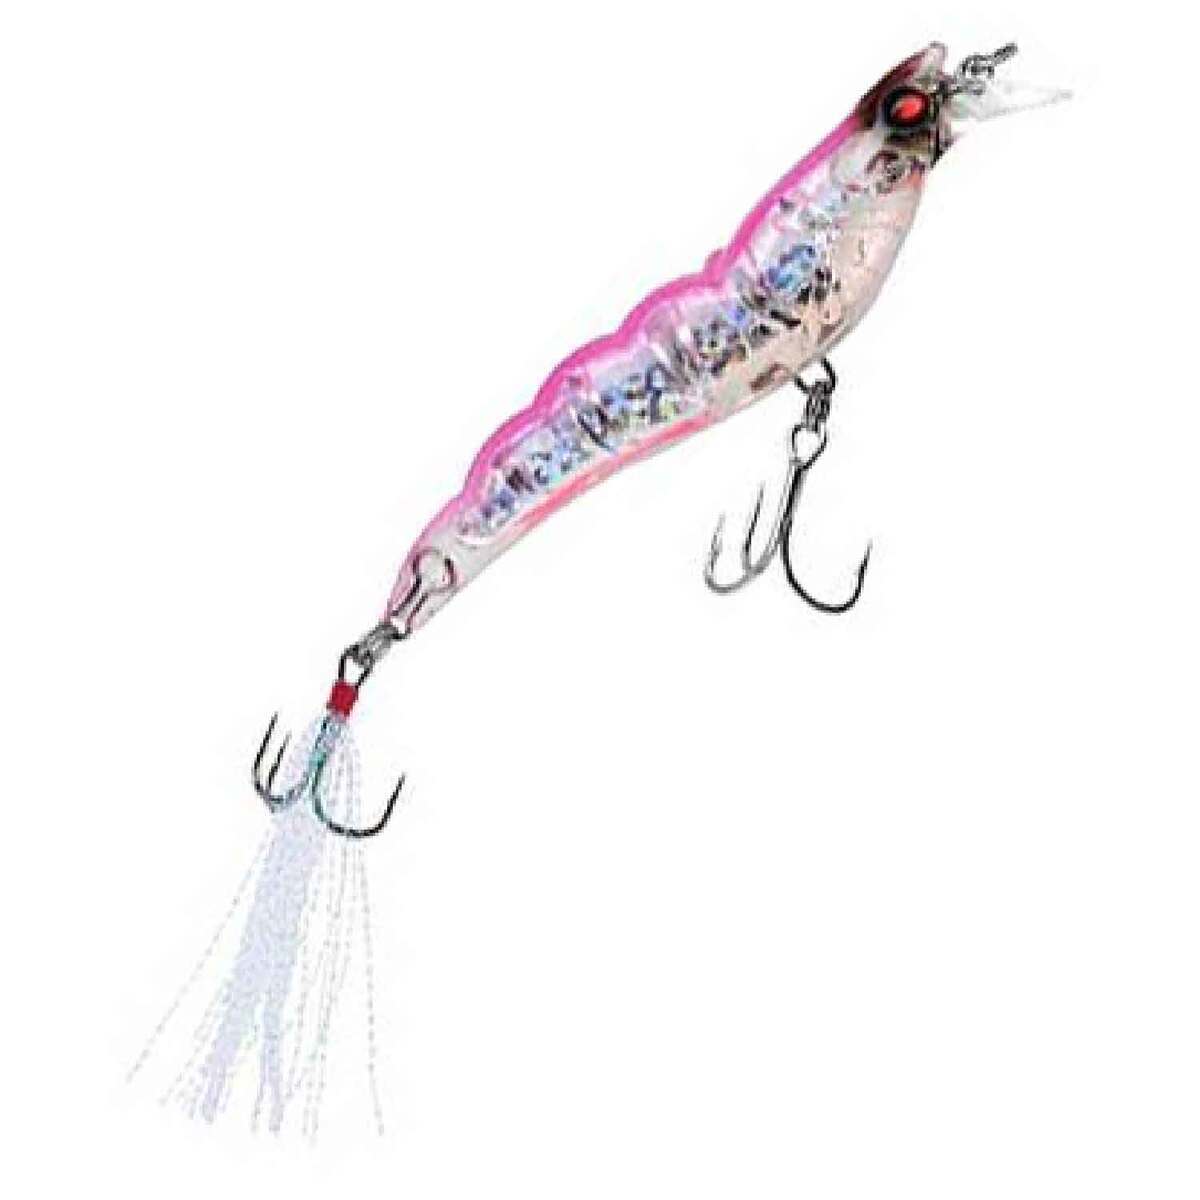 Ned's Bait Box Pout Bomb Jigging Spoon - 3in - Pink Glow by Sportsman's Warehouse